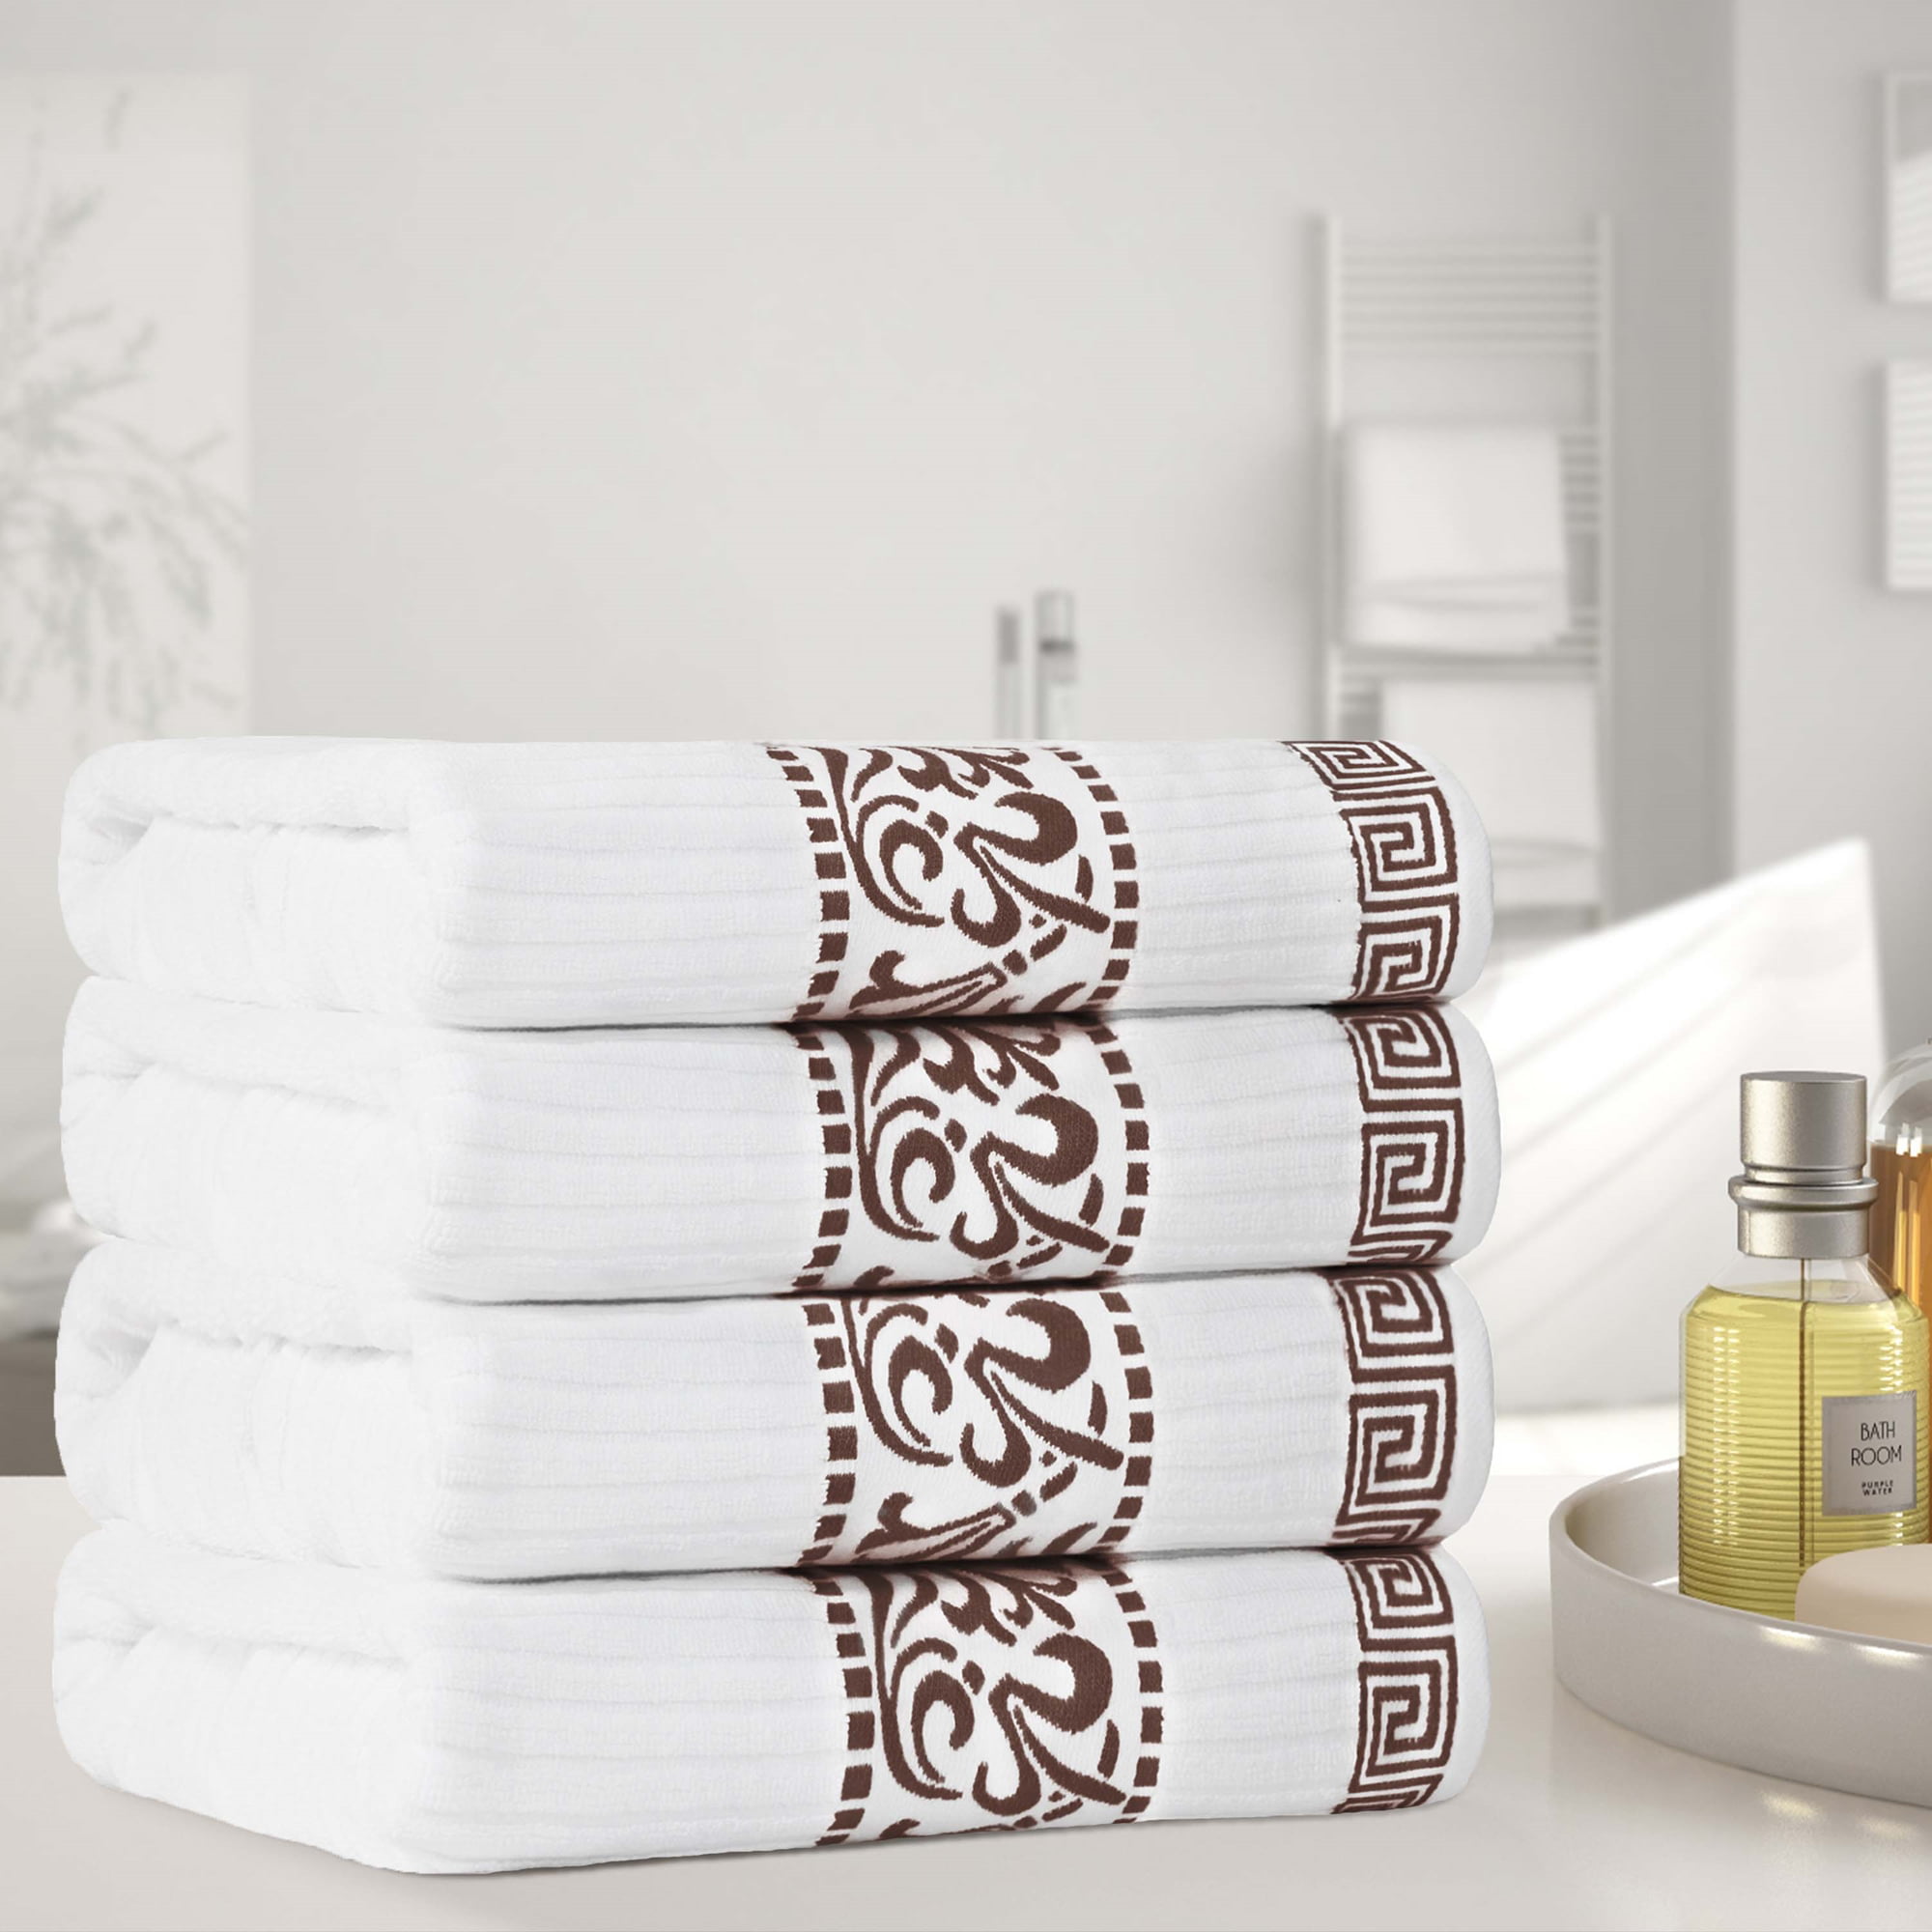 Manzala Bath Towel with Dobby Border, 27 x 54, White, Bath Towels, Towels, Bed and Bath Linens, Open Catalog